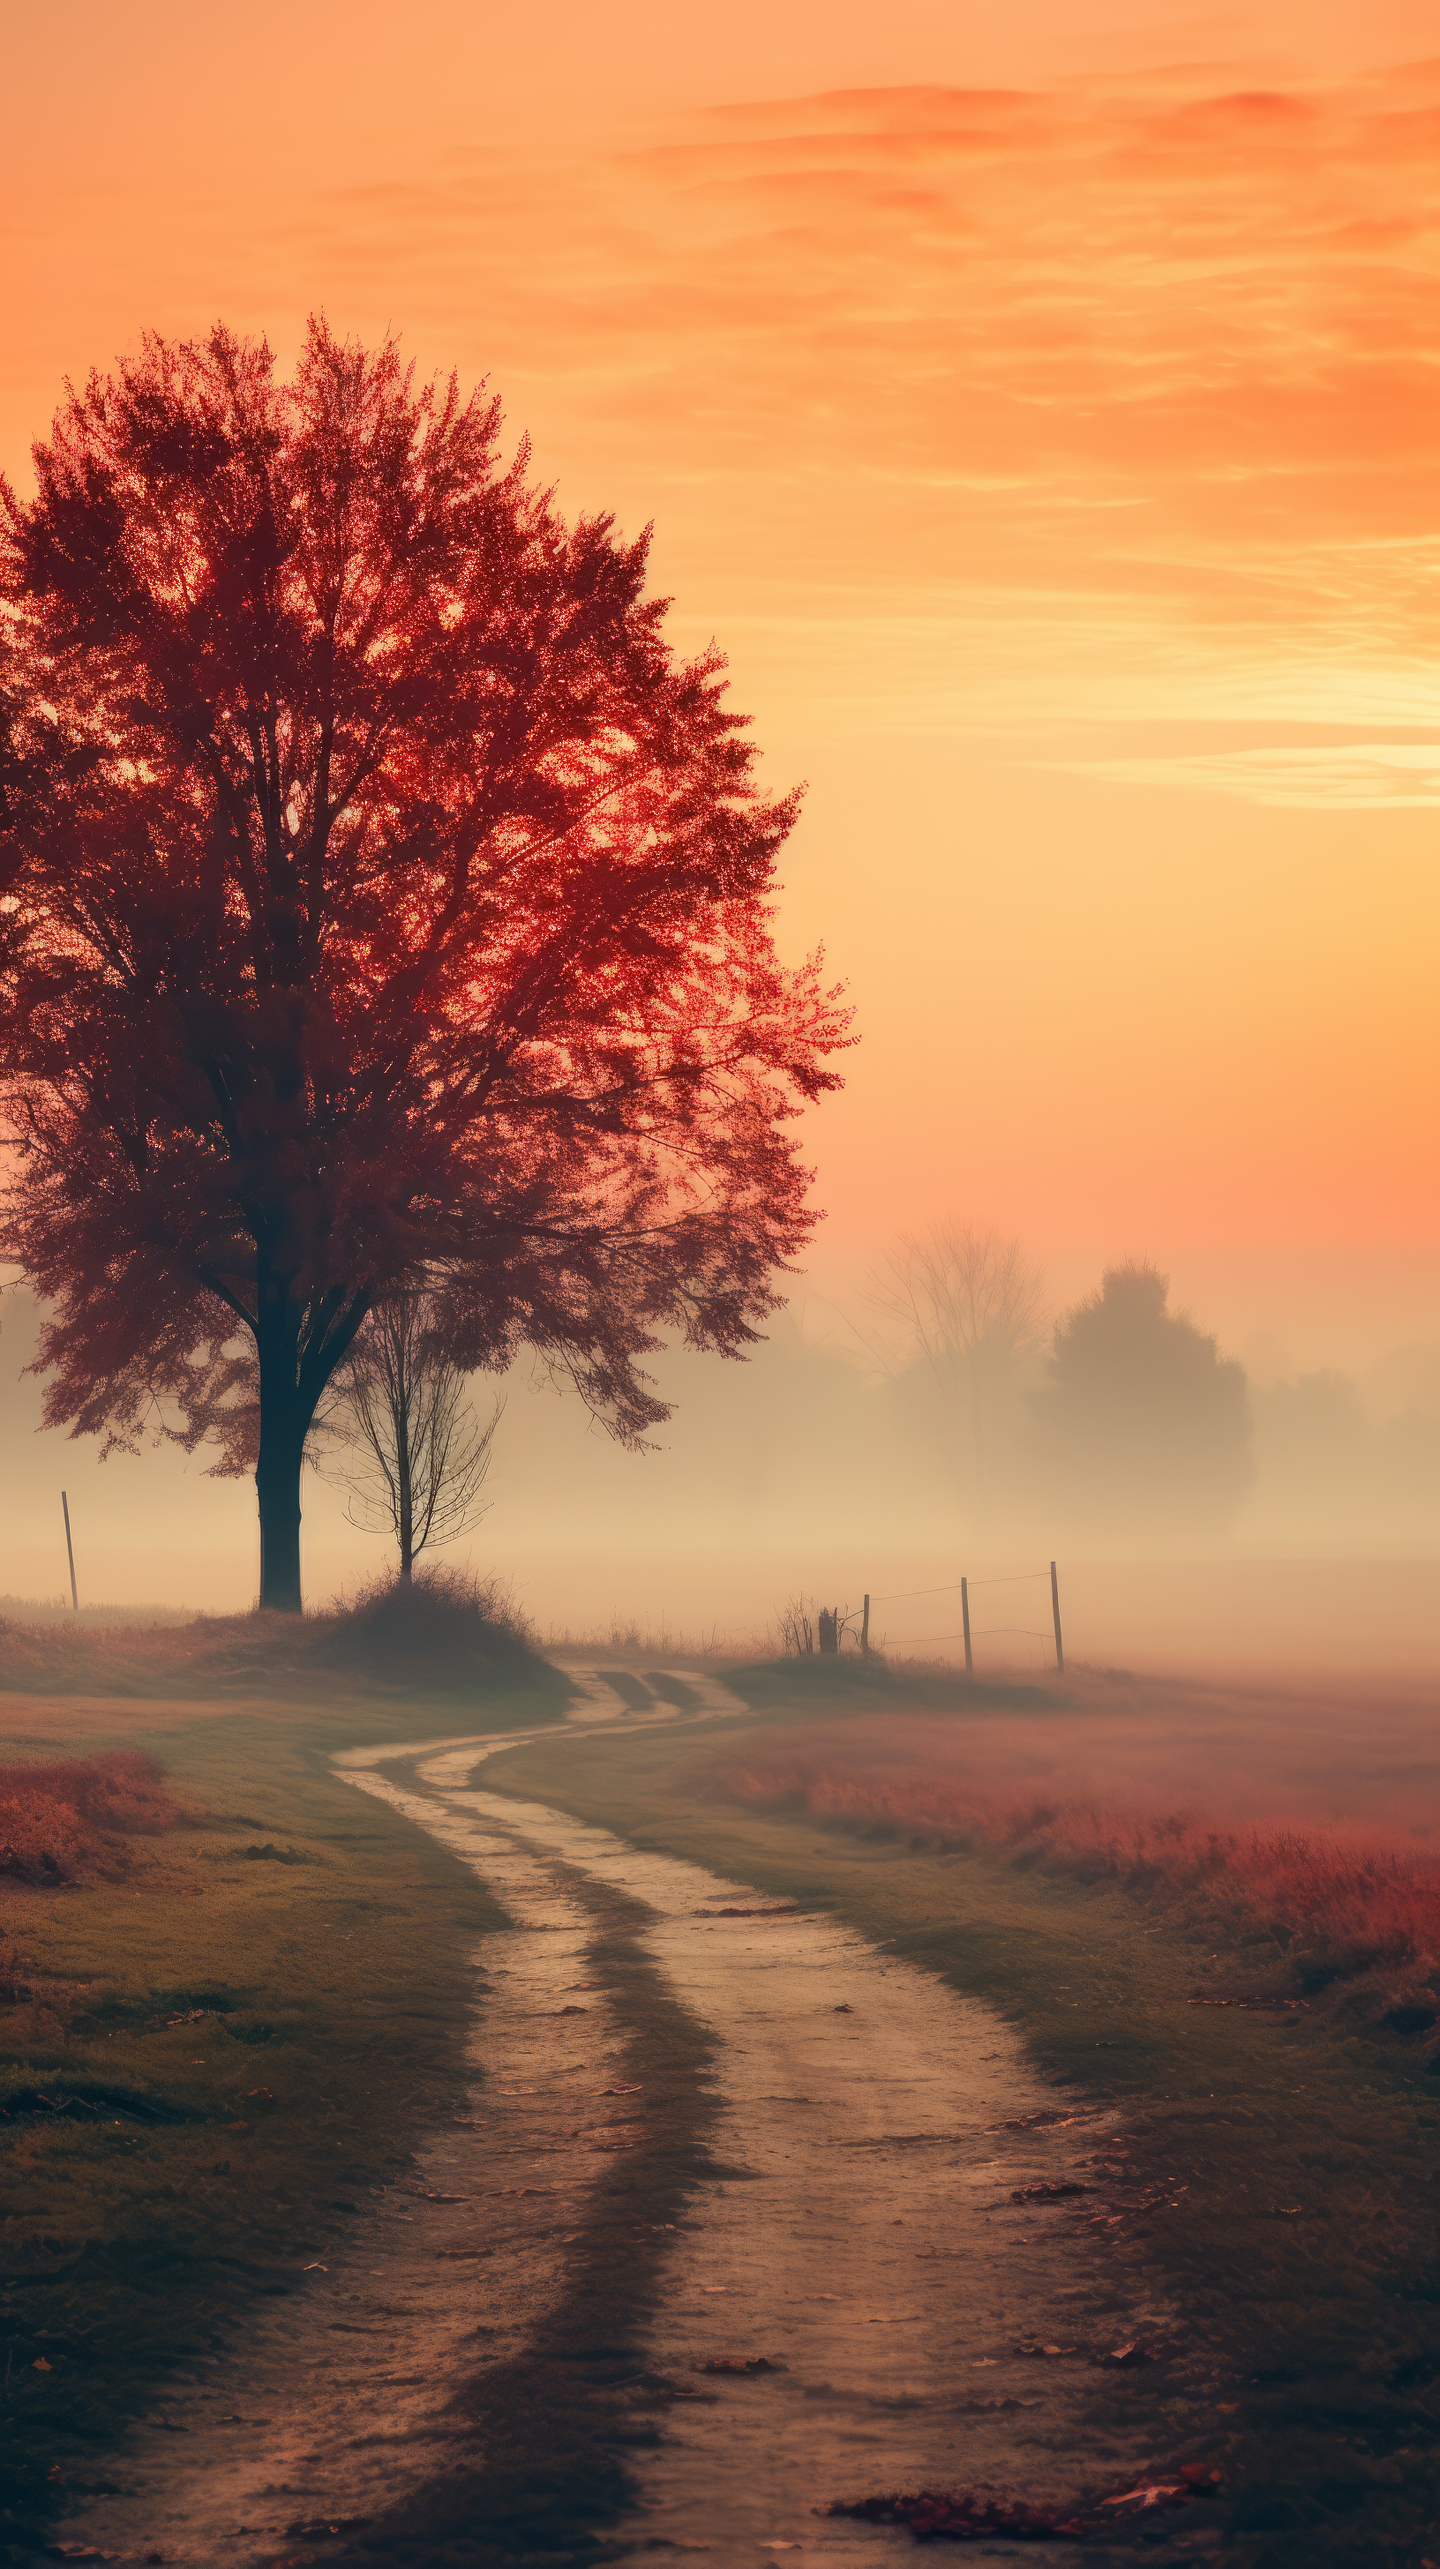 Phone wallpaper featuring a scenic path lined with trees amidst fall foliage under a foggy sunset sky.